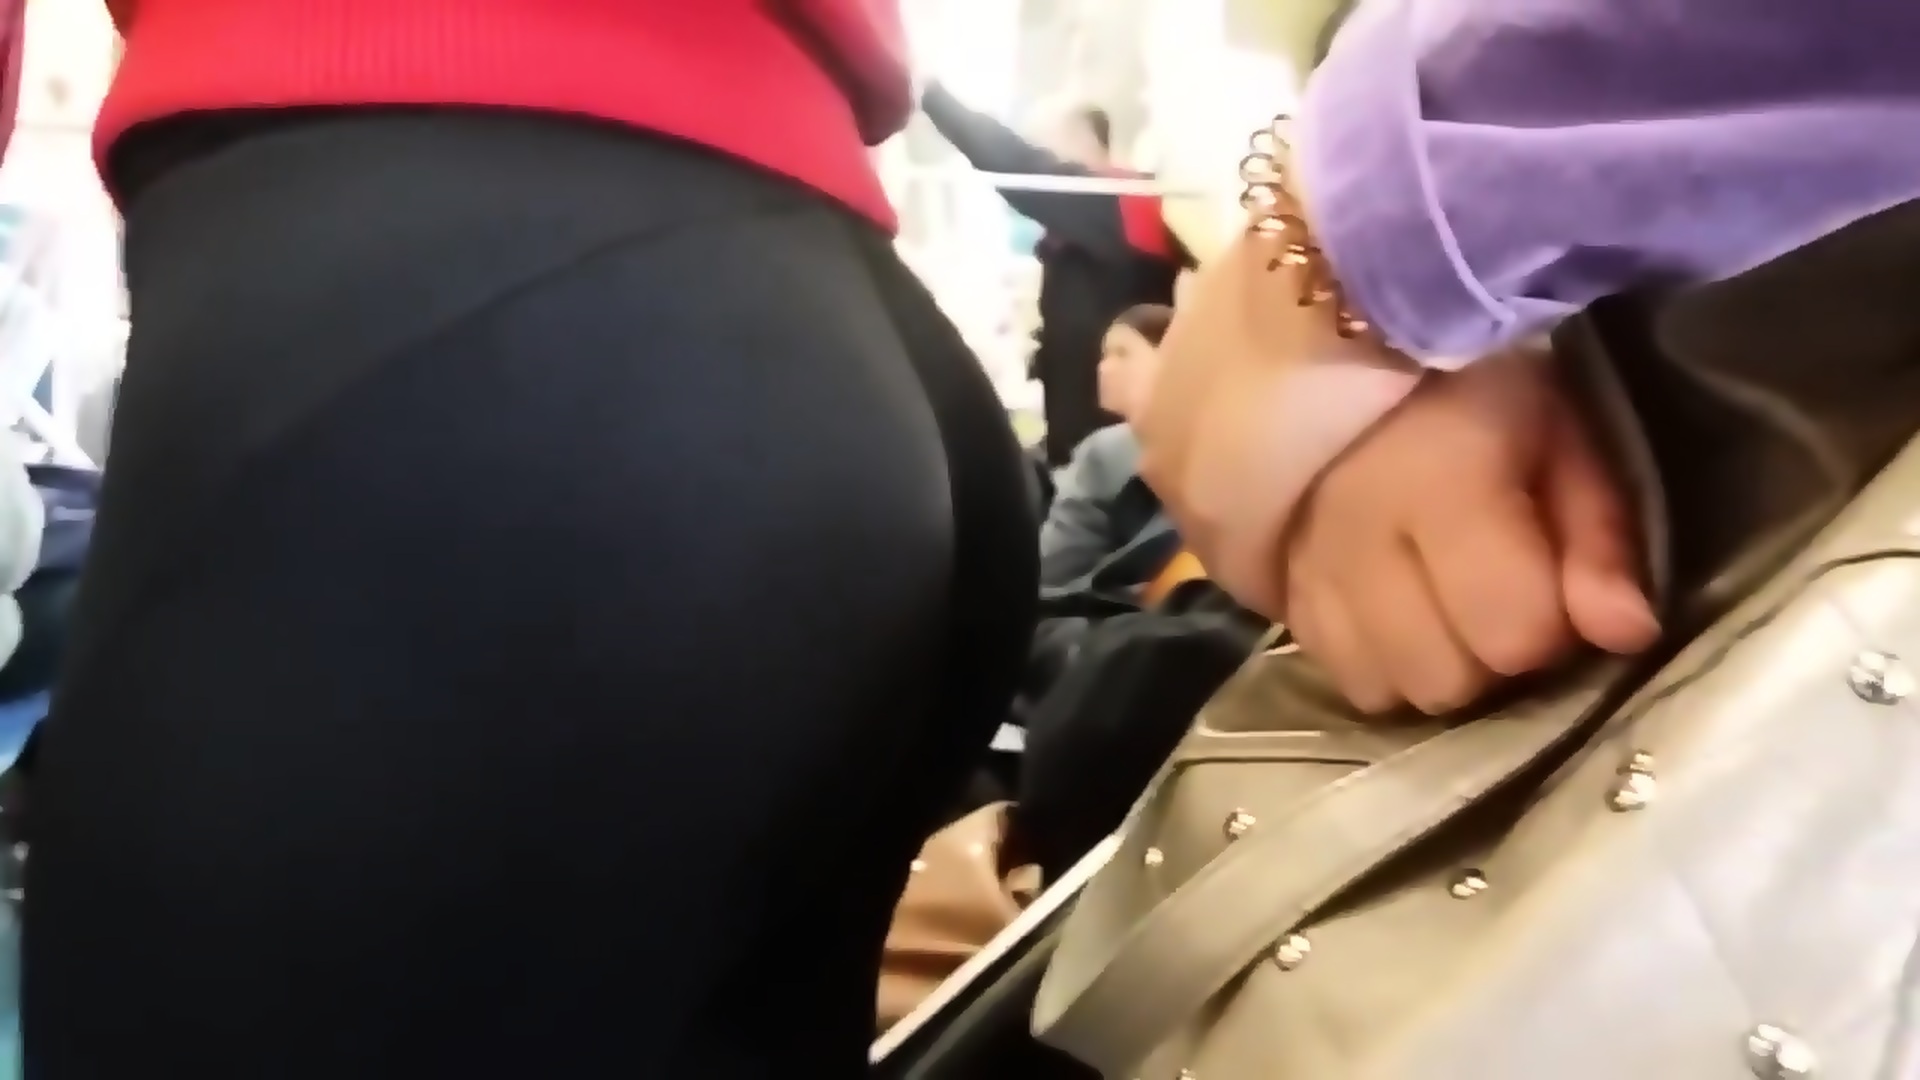 Tight Teen Ass In Spandex Leggings On The Train The Butt